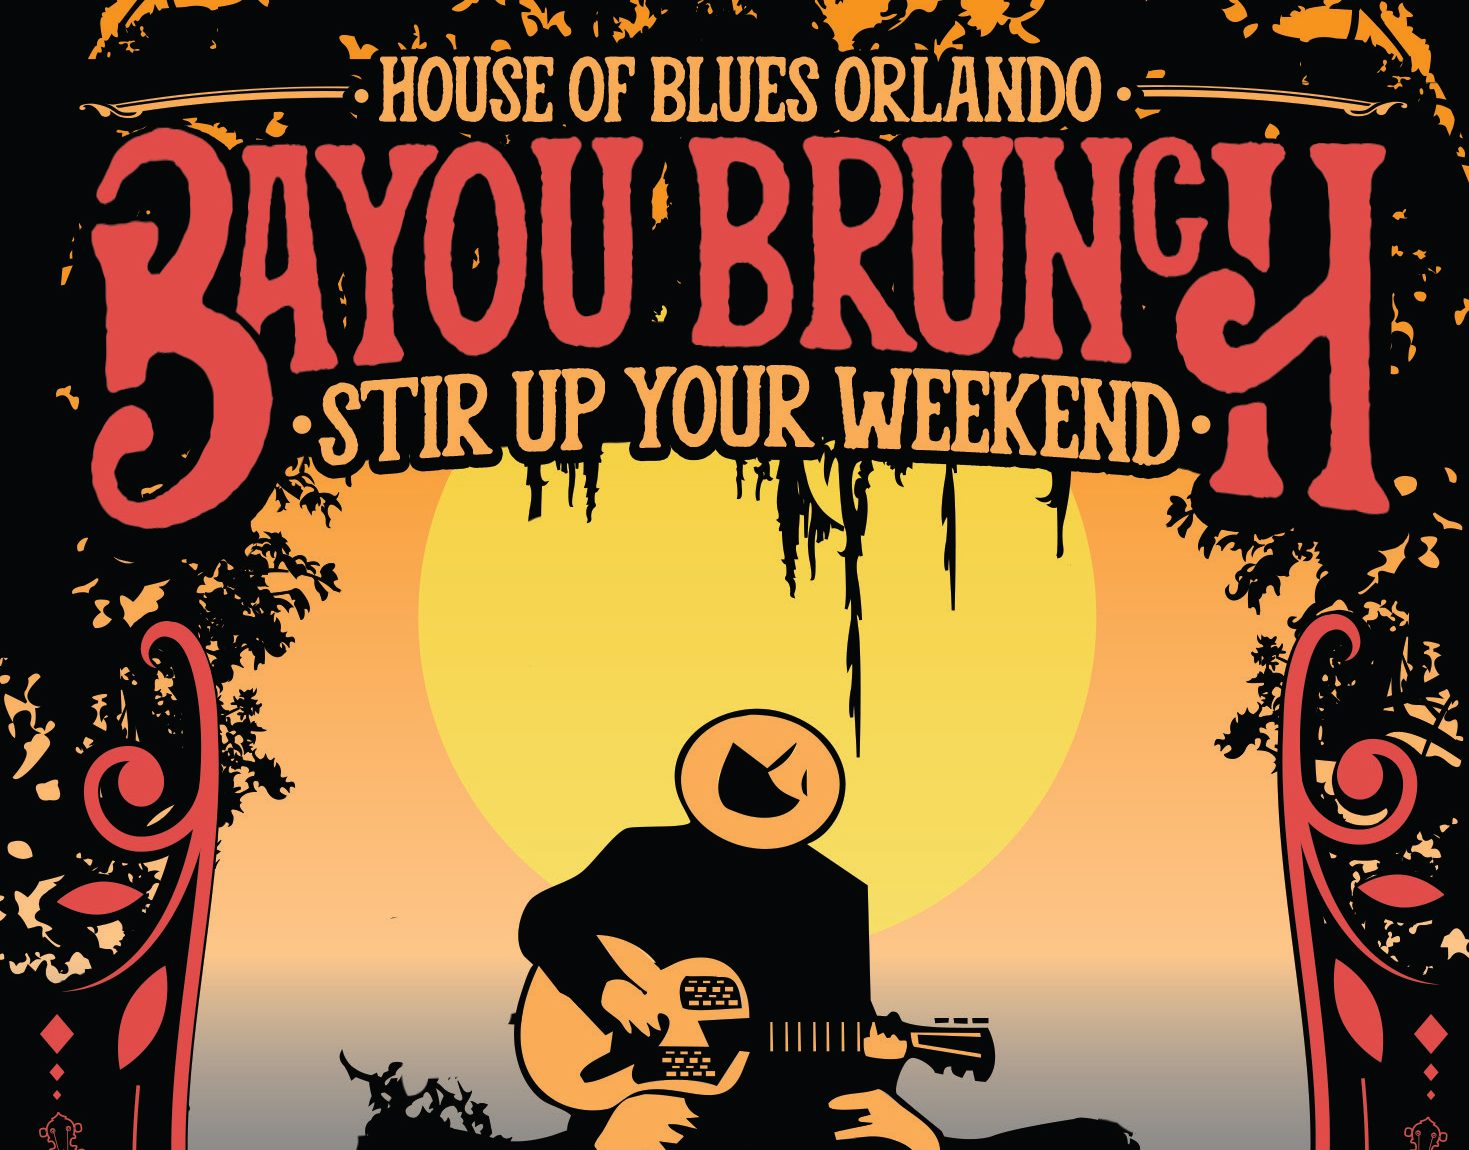 House of Blues Orlando’s Bayou Brunch Transforms Traditional Brunch